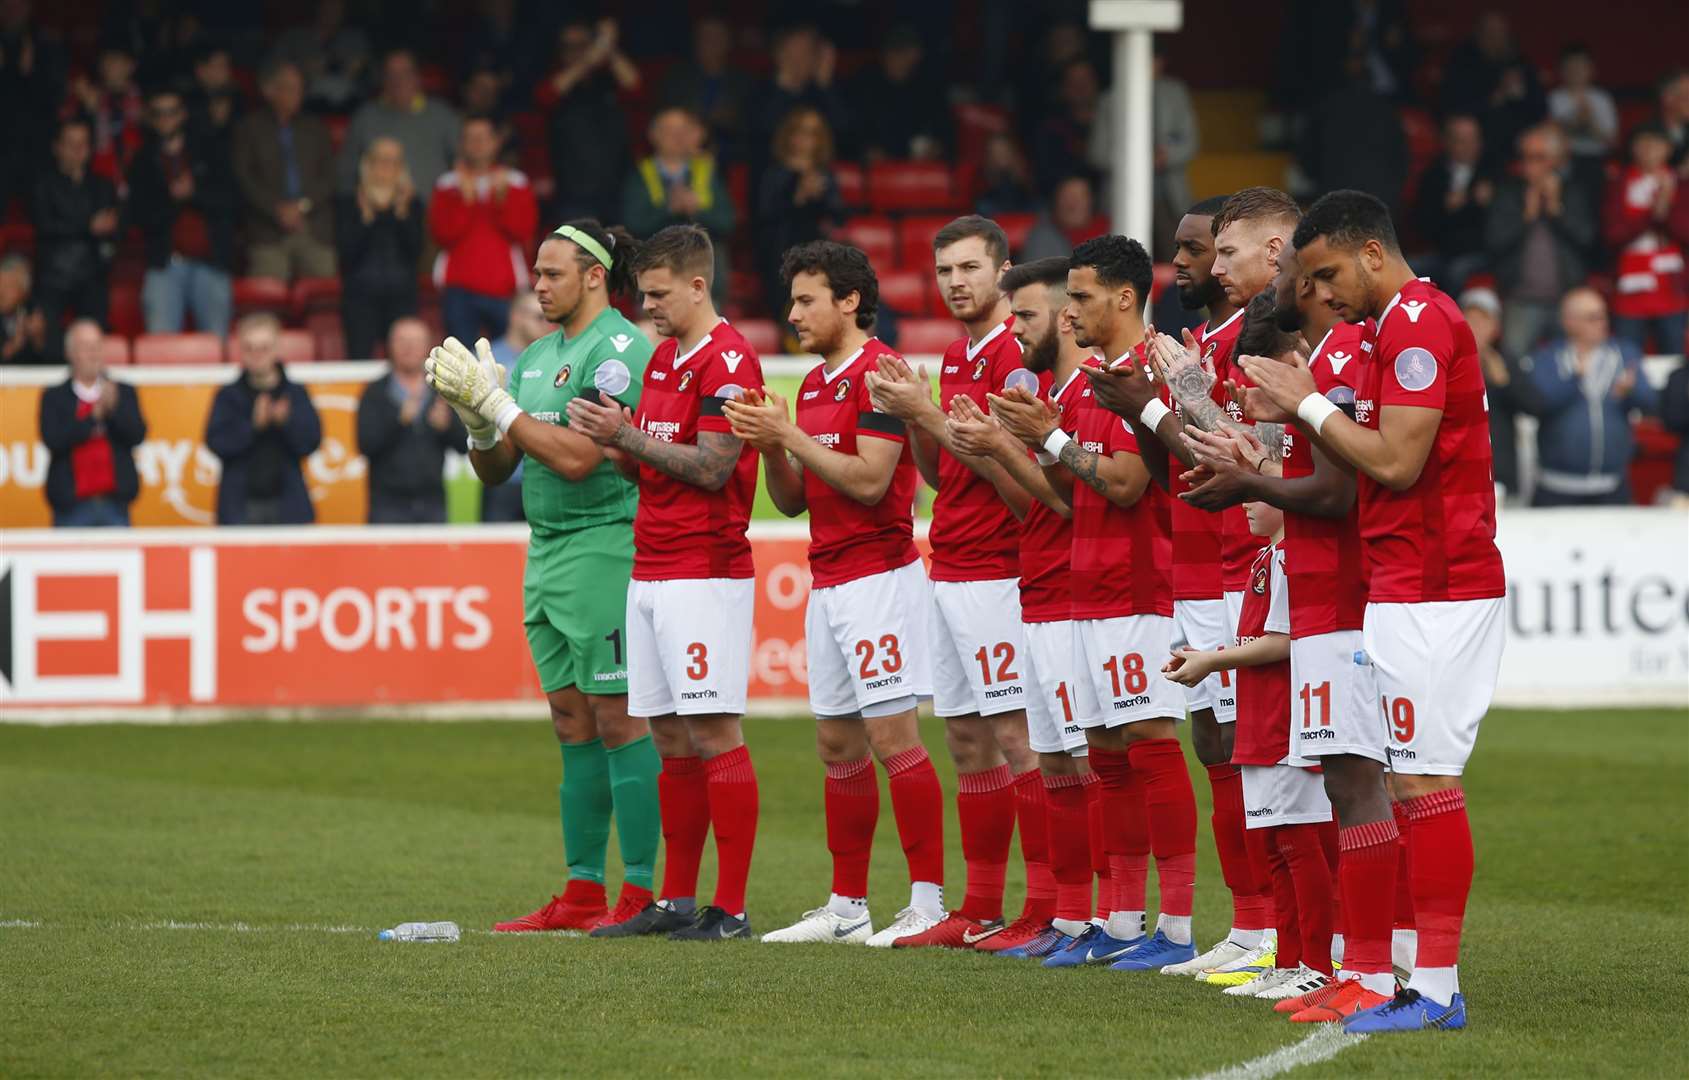 There was a minute's applause for Michael Thalassitis before Ebbsfleet's game against Wrexham Picture: Andy Jones